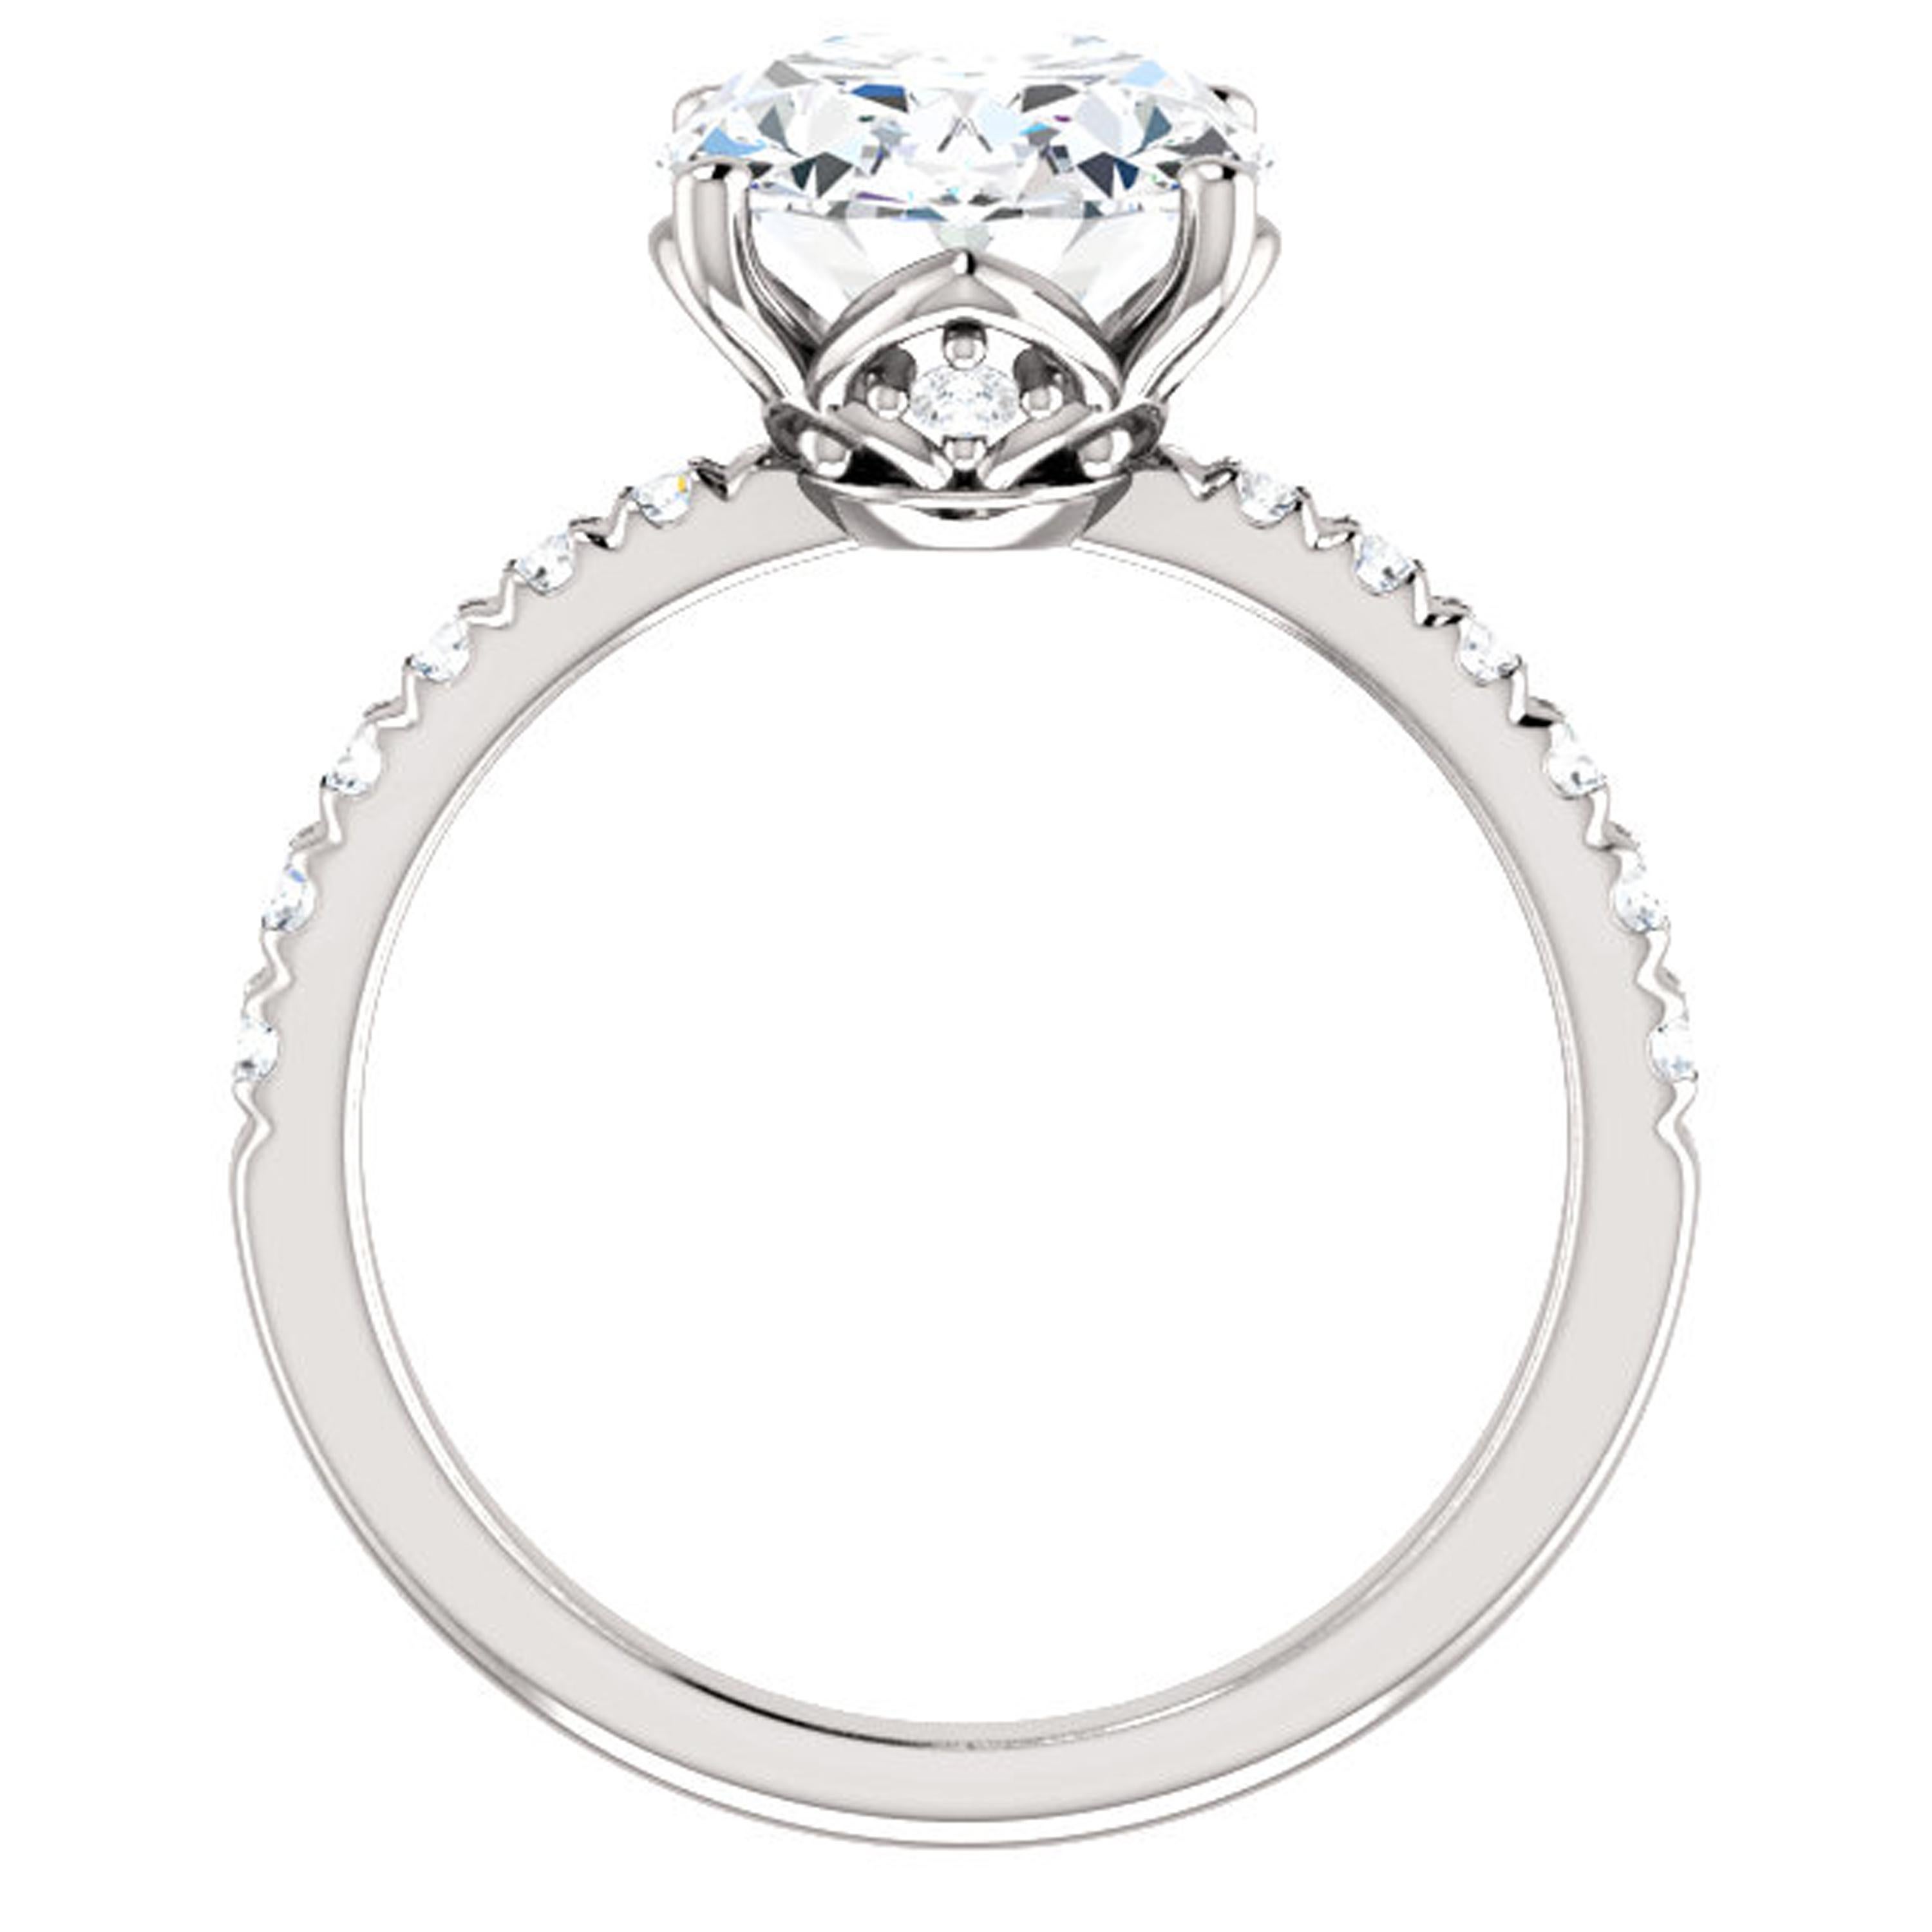 As opposed to prongs, French-set diamonds are intricately set closely together with wide open sides to allow more light to enter each diamond, generating maximum shine. The diamond is also grasped by a gleaming bead of metal that is carefully placed